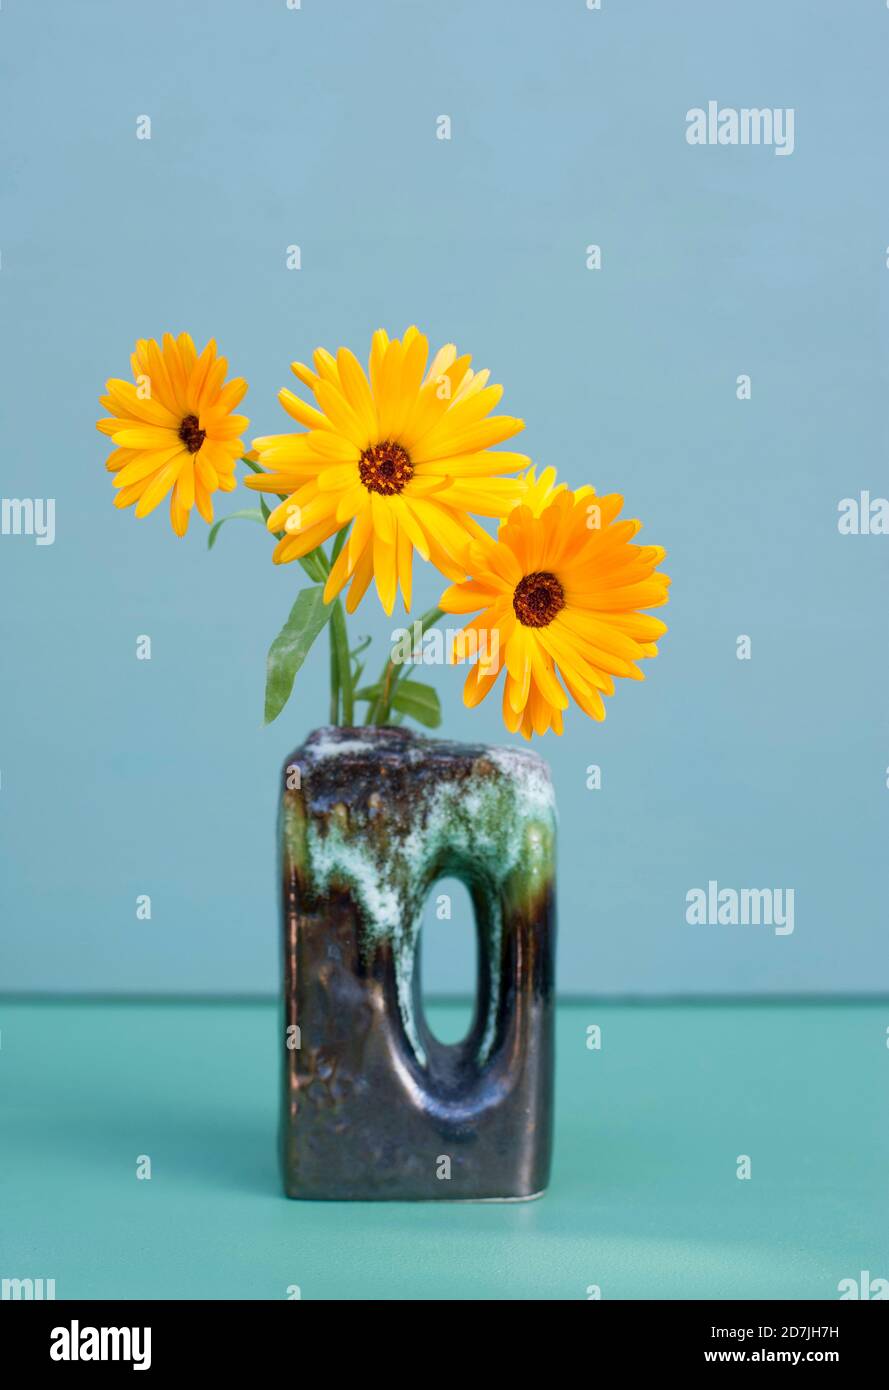 Yellow marigolds blooming in vase Stock Photo